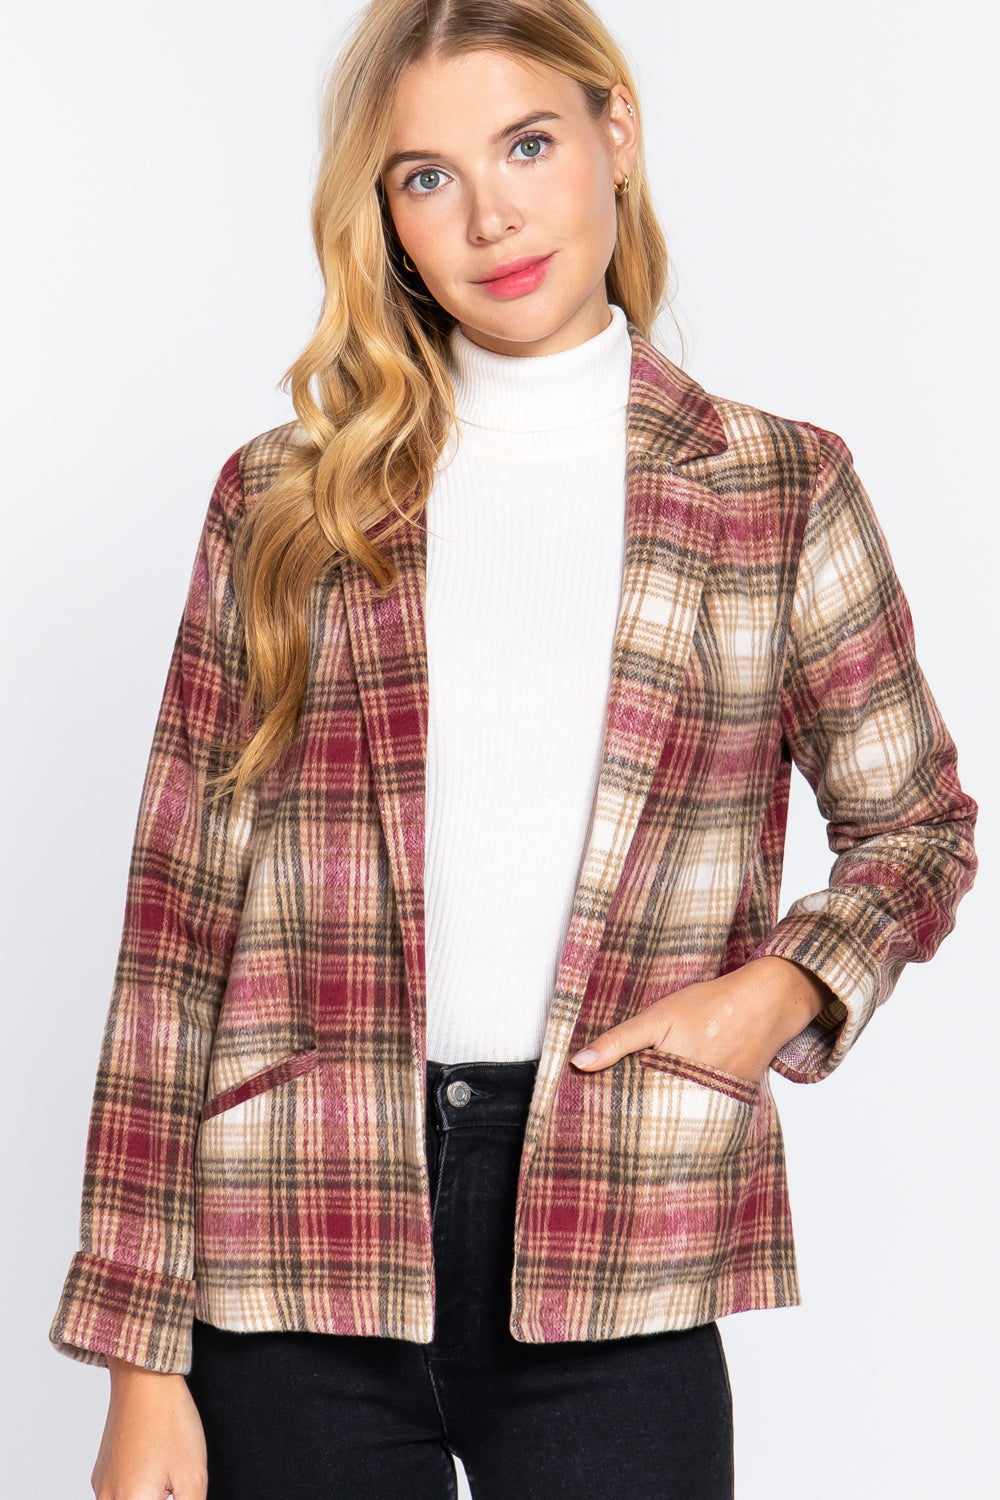 Wine/Brown - Notched Collar Plaid Jacket - 2 colors - womens blazer at TFC&H Co.